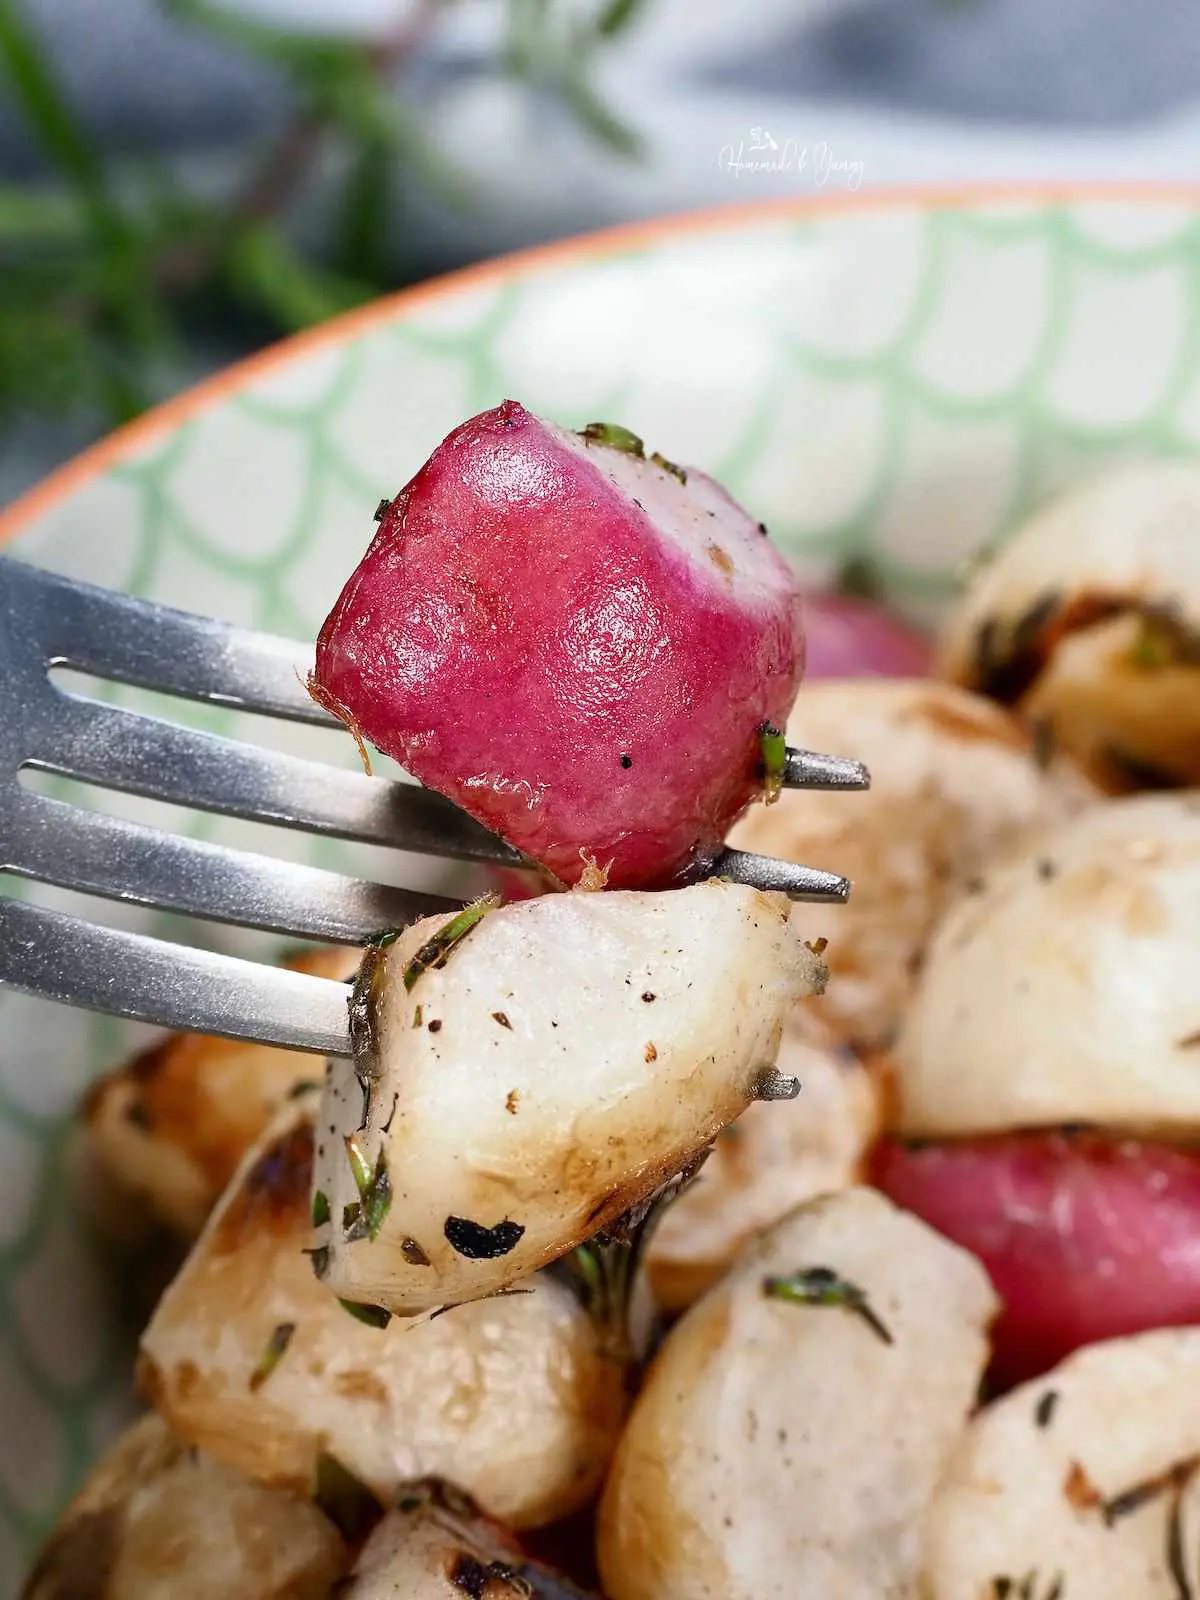 A fork with 1 piece of radish and 1 piece of turnip.